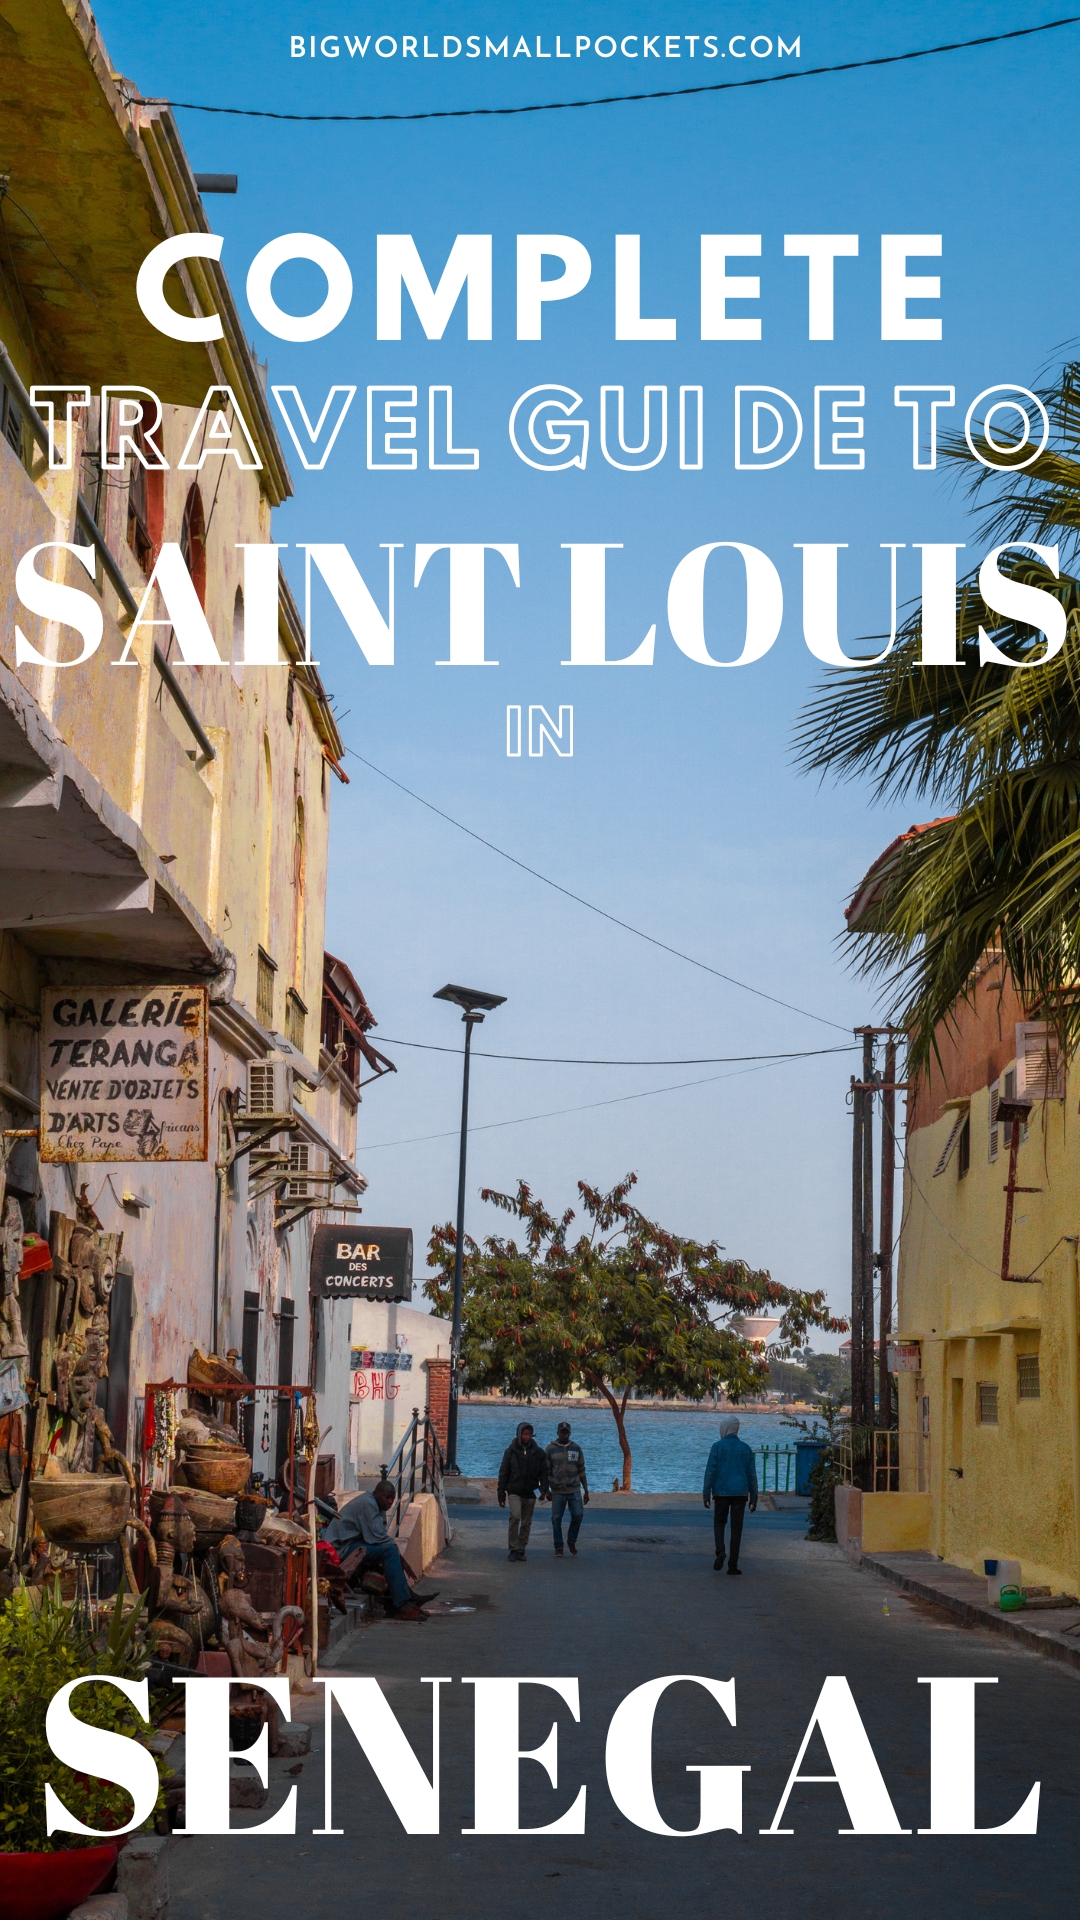 Complete Travel Guide to Saint Louis in Senegal, West Africa